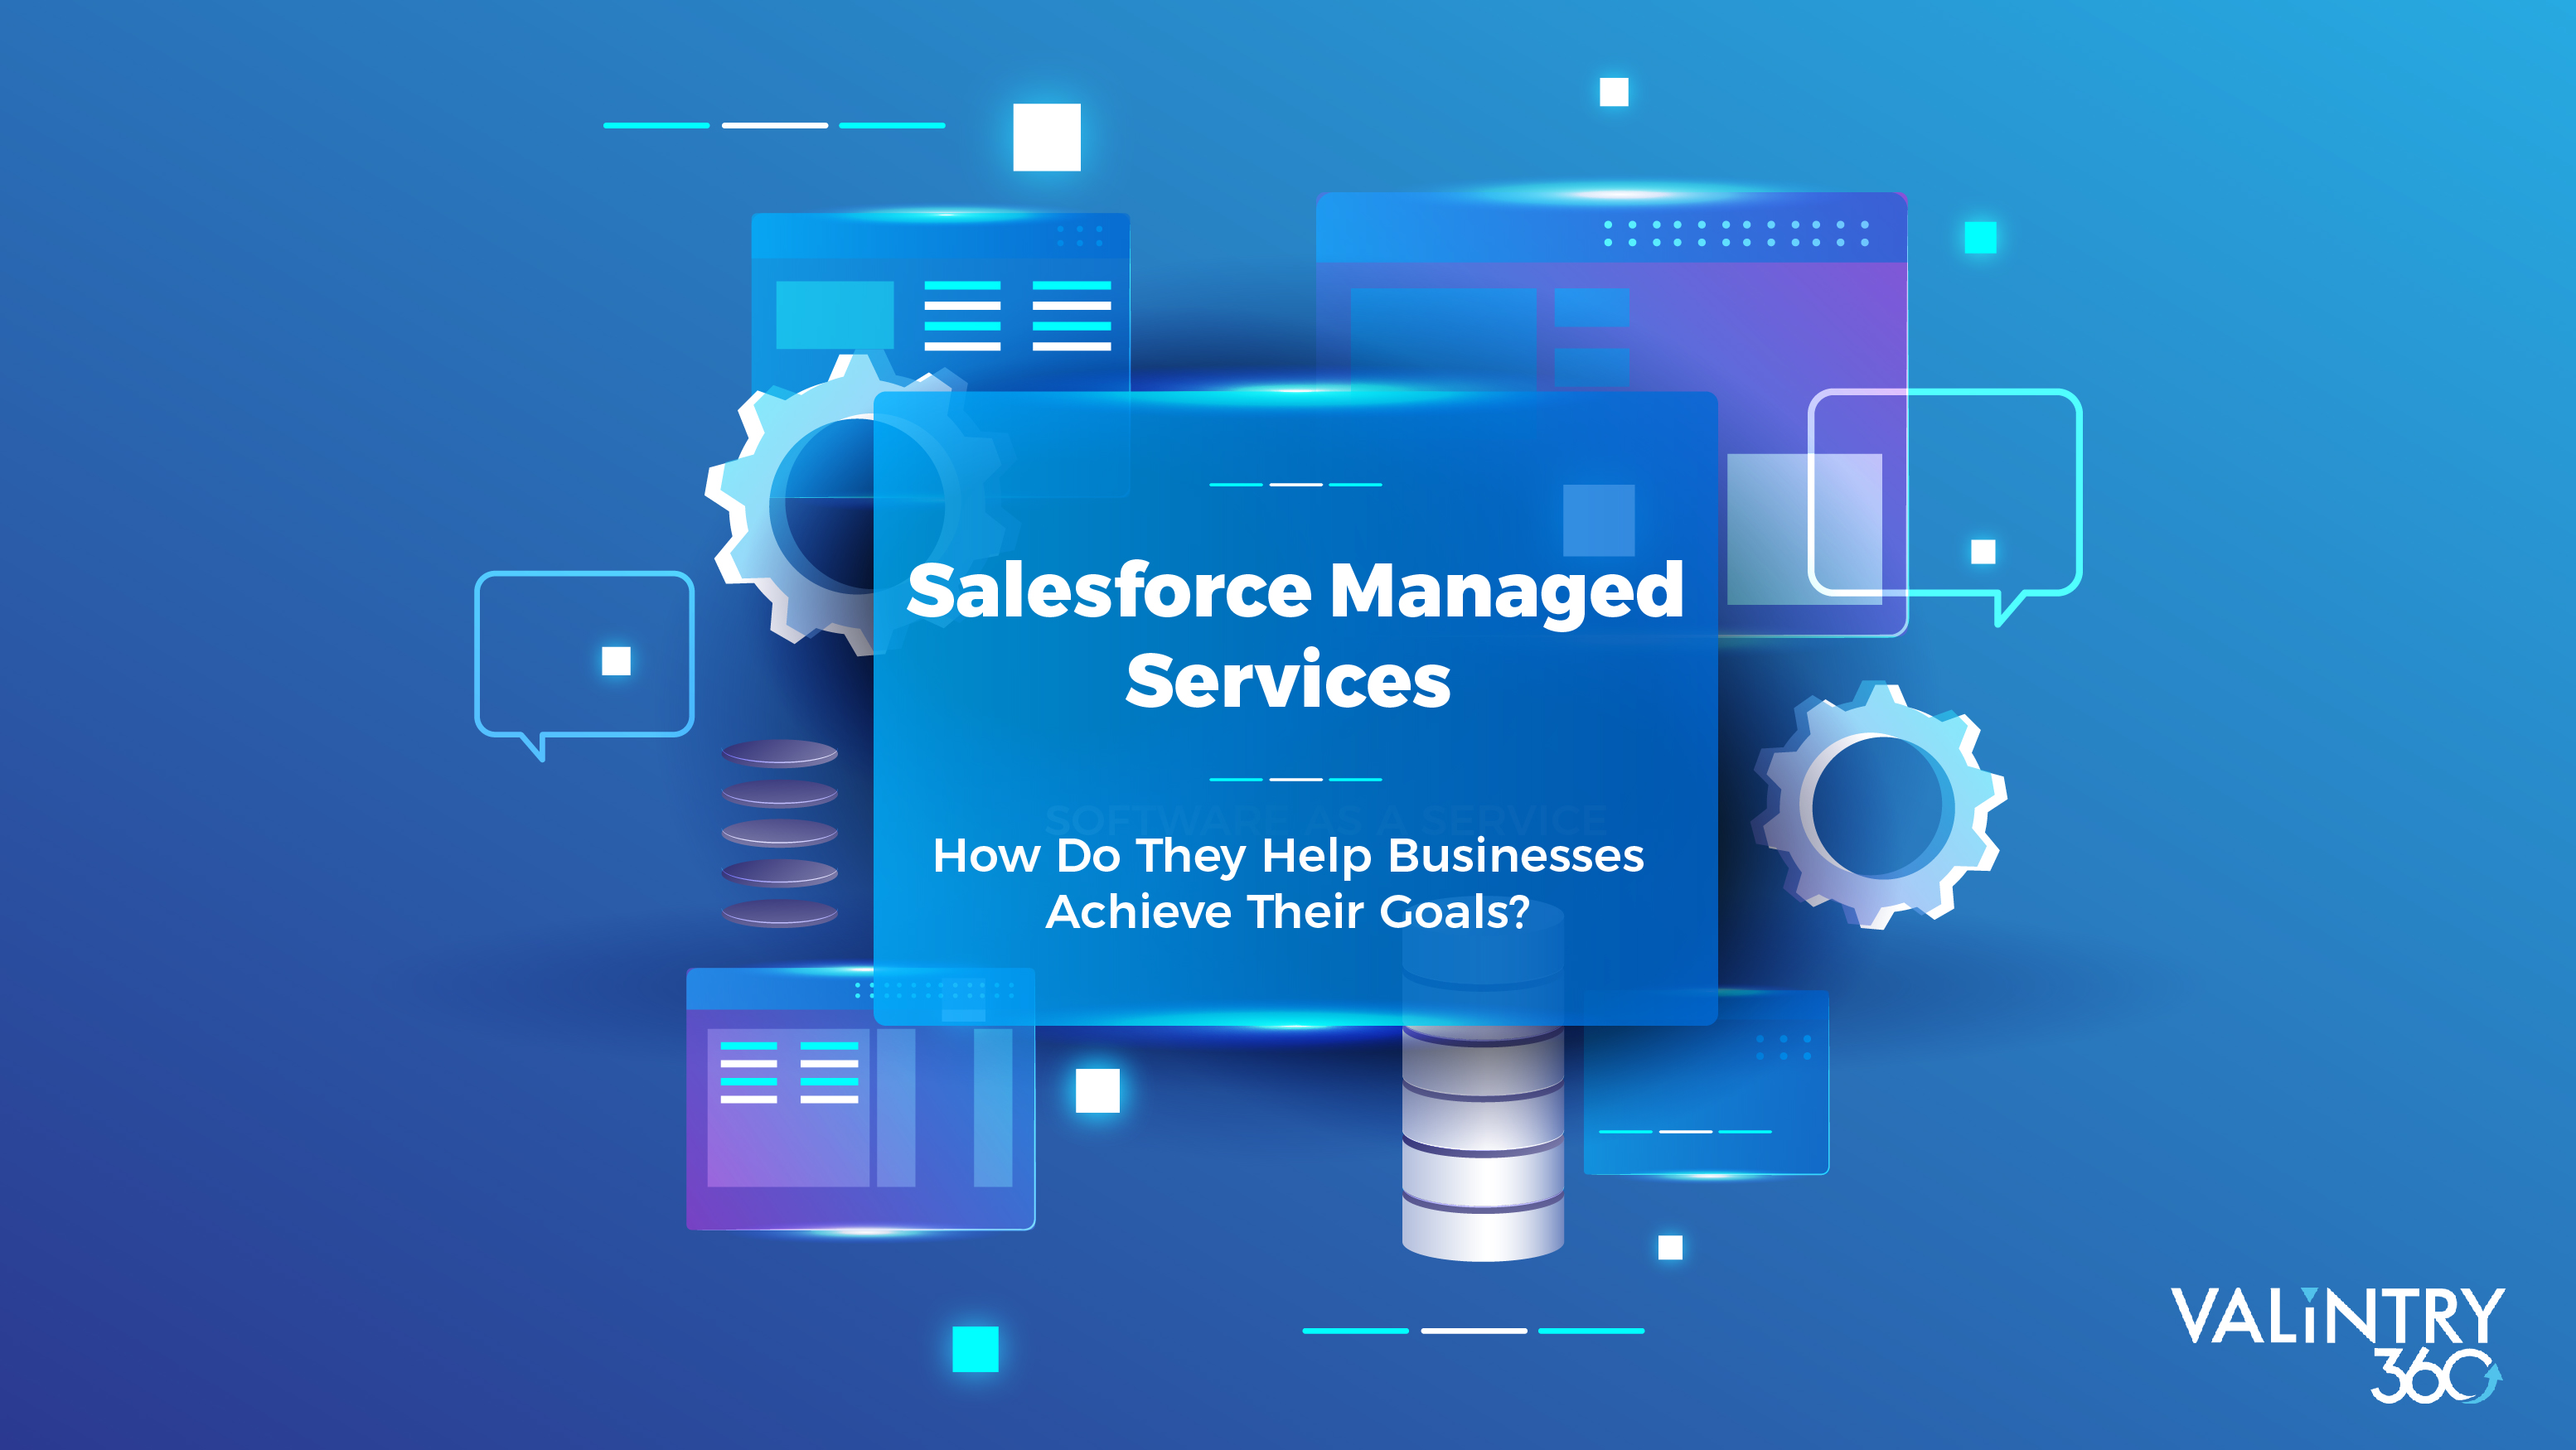 Learn how salesforce managed services can help small businesses grow and succeed – VALiNTRY360